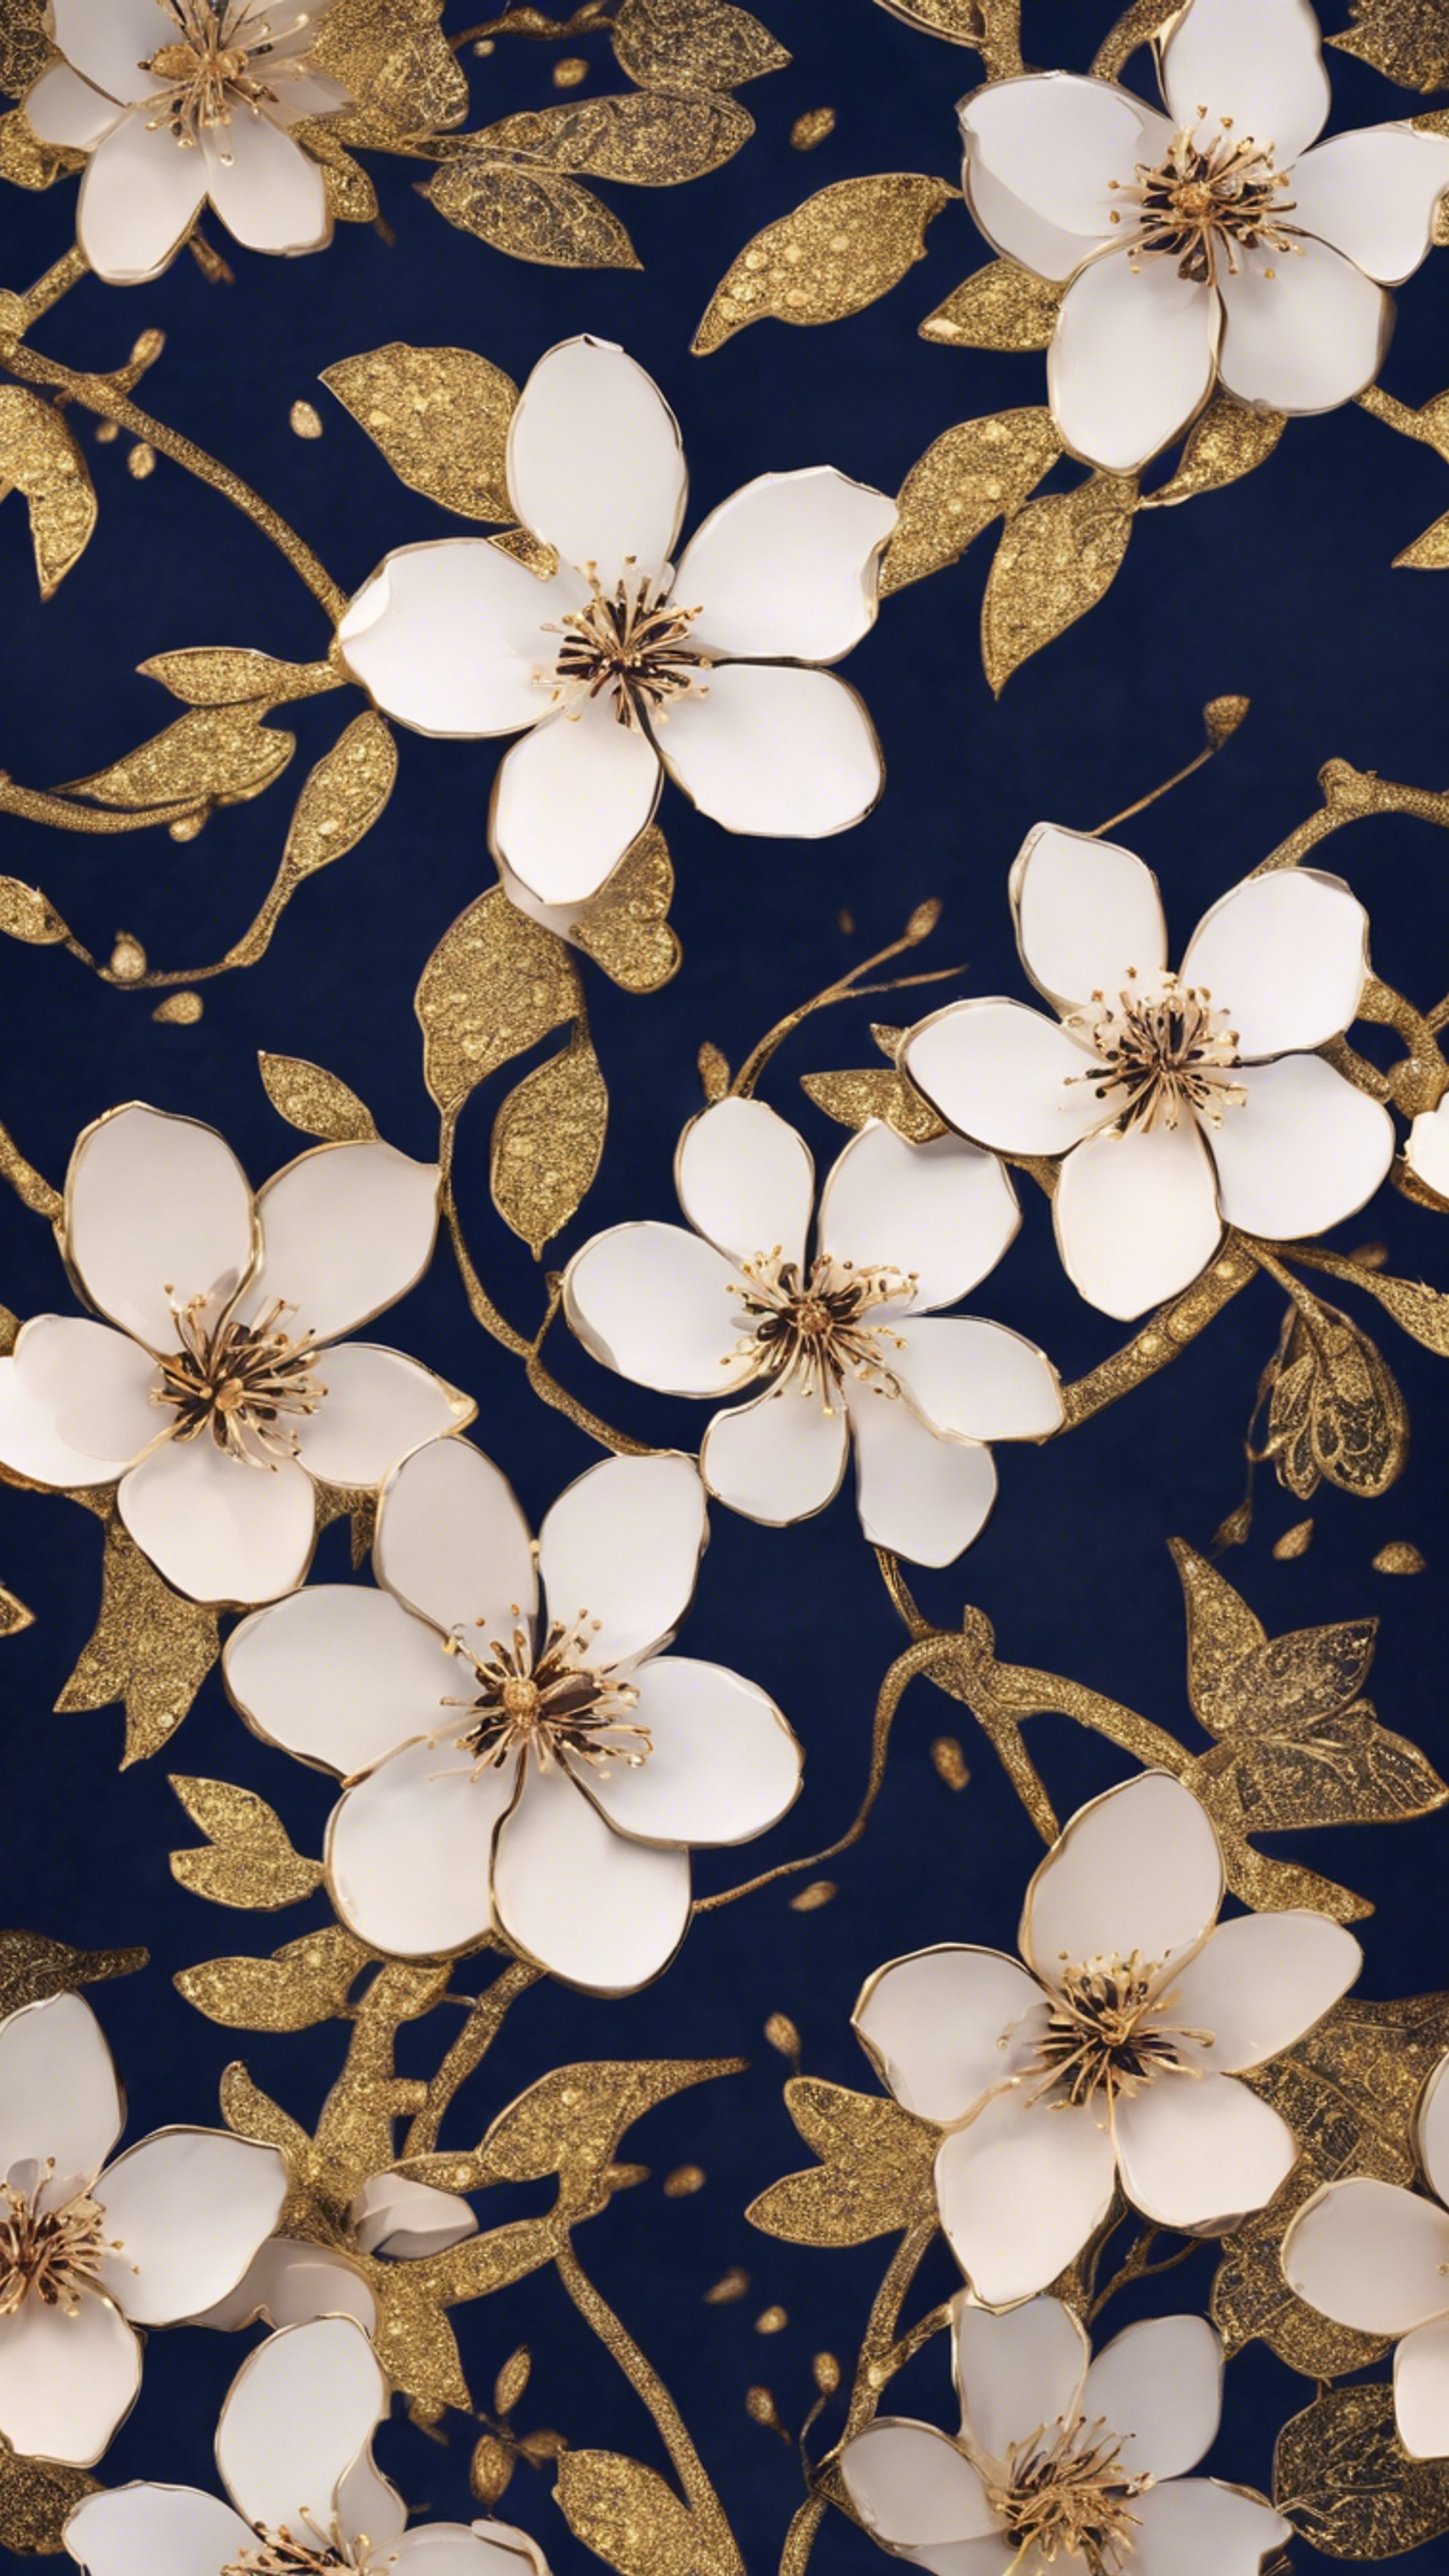 A sophisticated floral pattern with gold embellished cherry blossoms on a deep indigo background.壁紙[d0e0e08eef6545a9b688]